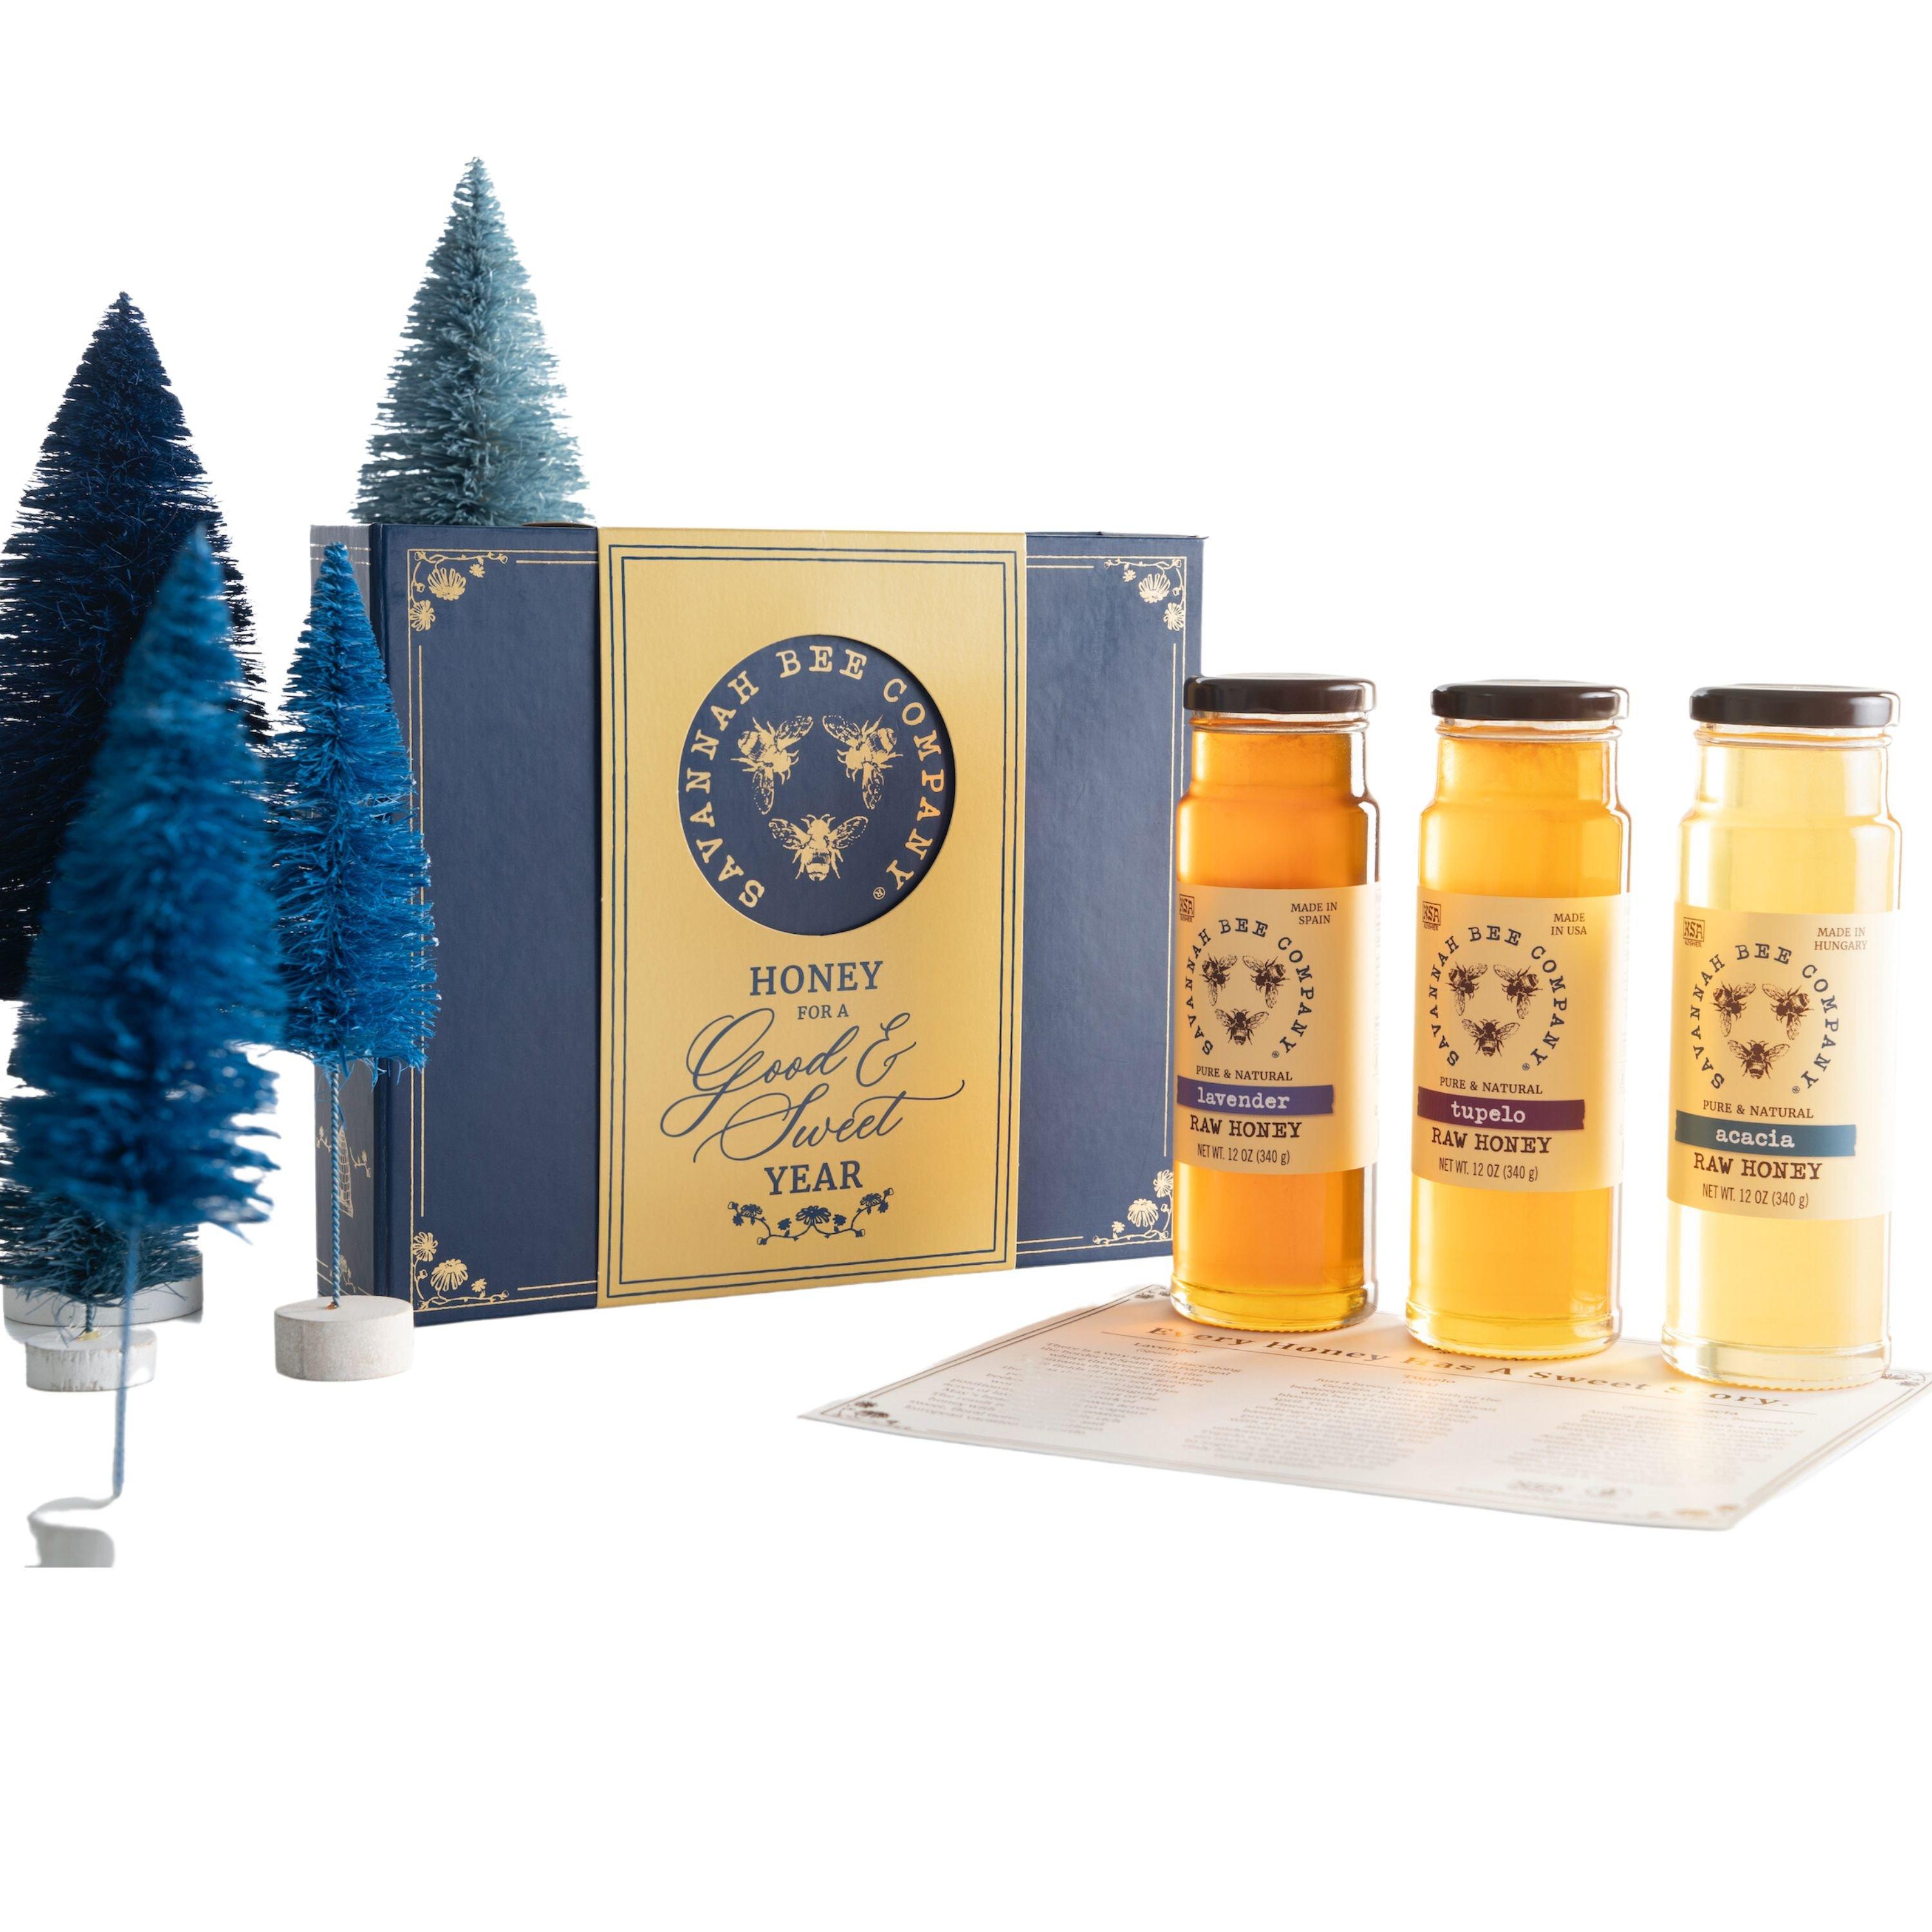 Savannah Bee Book of Honey for a Good and Sweet Year Gift Set